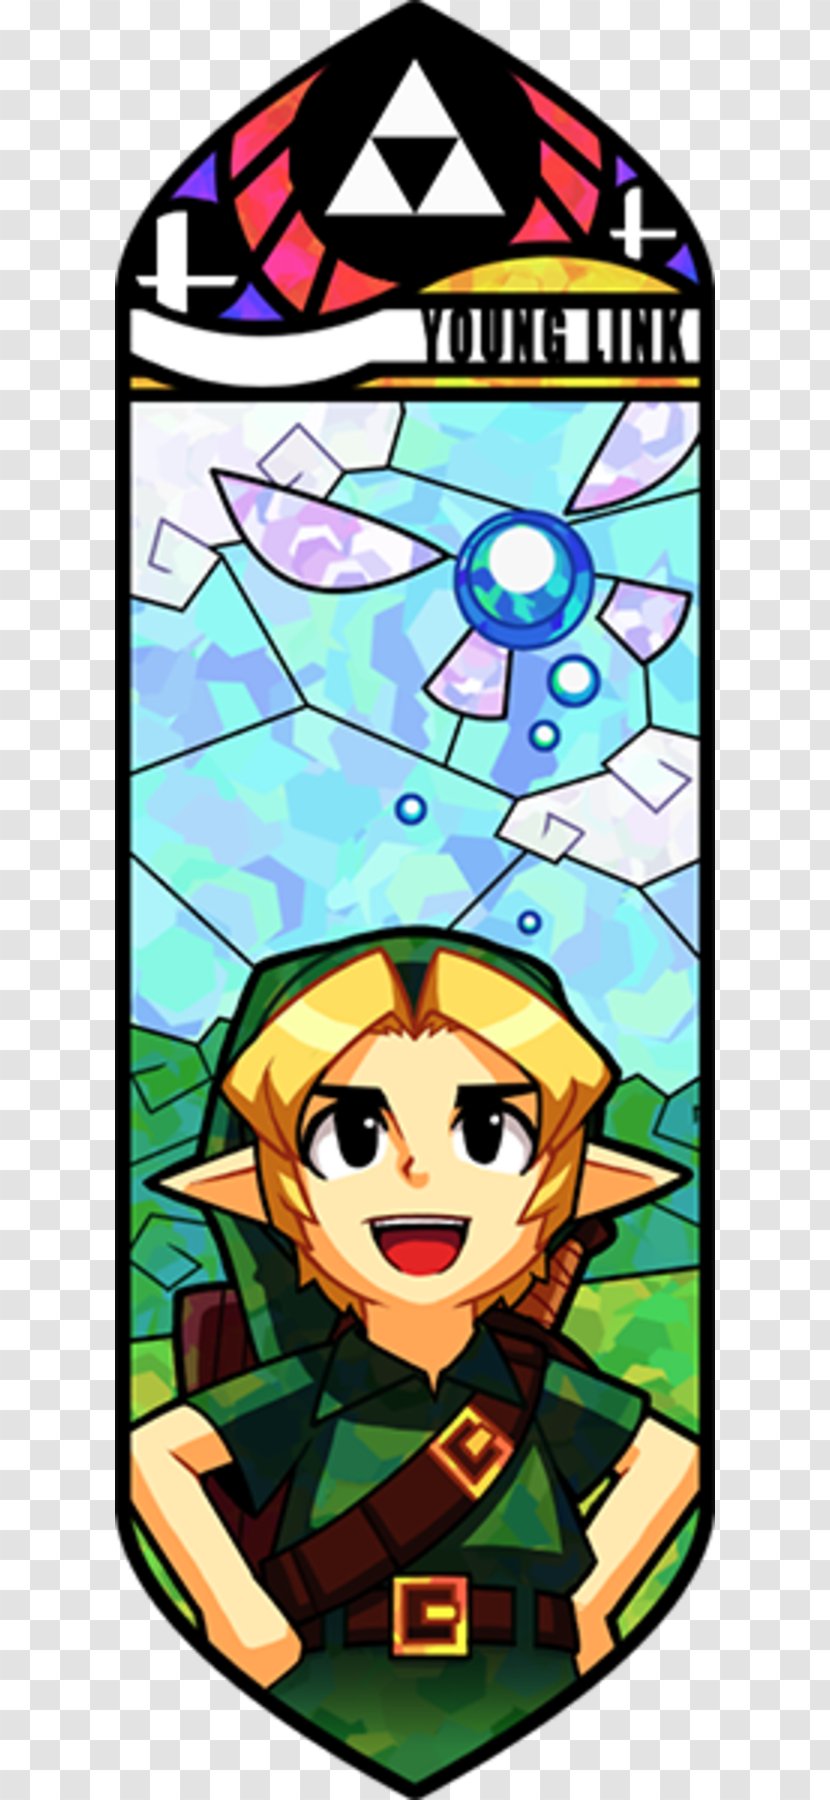 Super Smash Bros. For Nintendo 3DS And Wii U Link The Legend Of Zelda: Majora's Mask Melee Wind Waker - Stained Glass - Kirby Transparent PNG